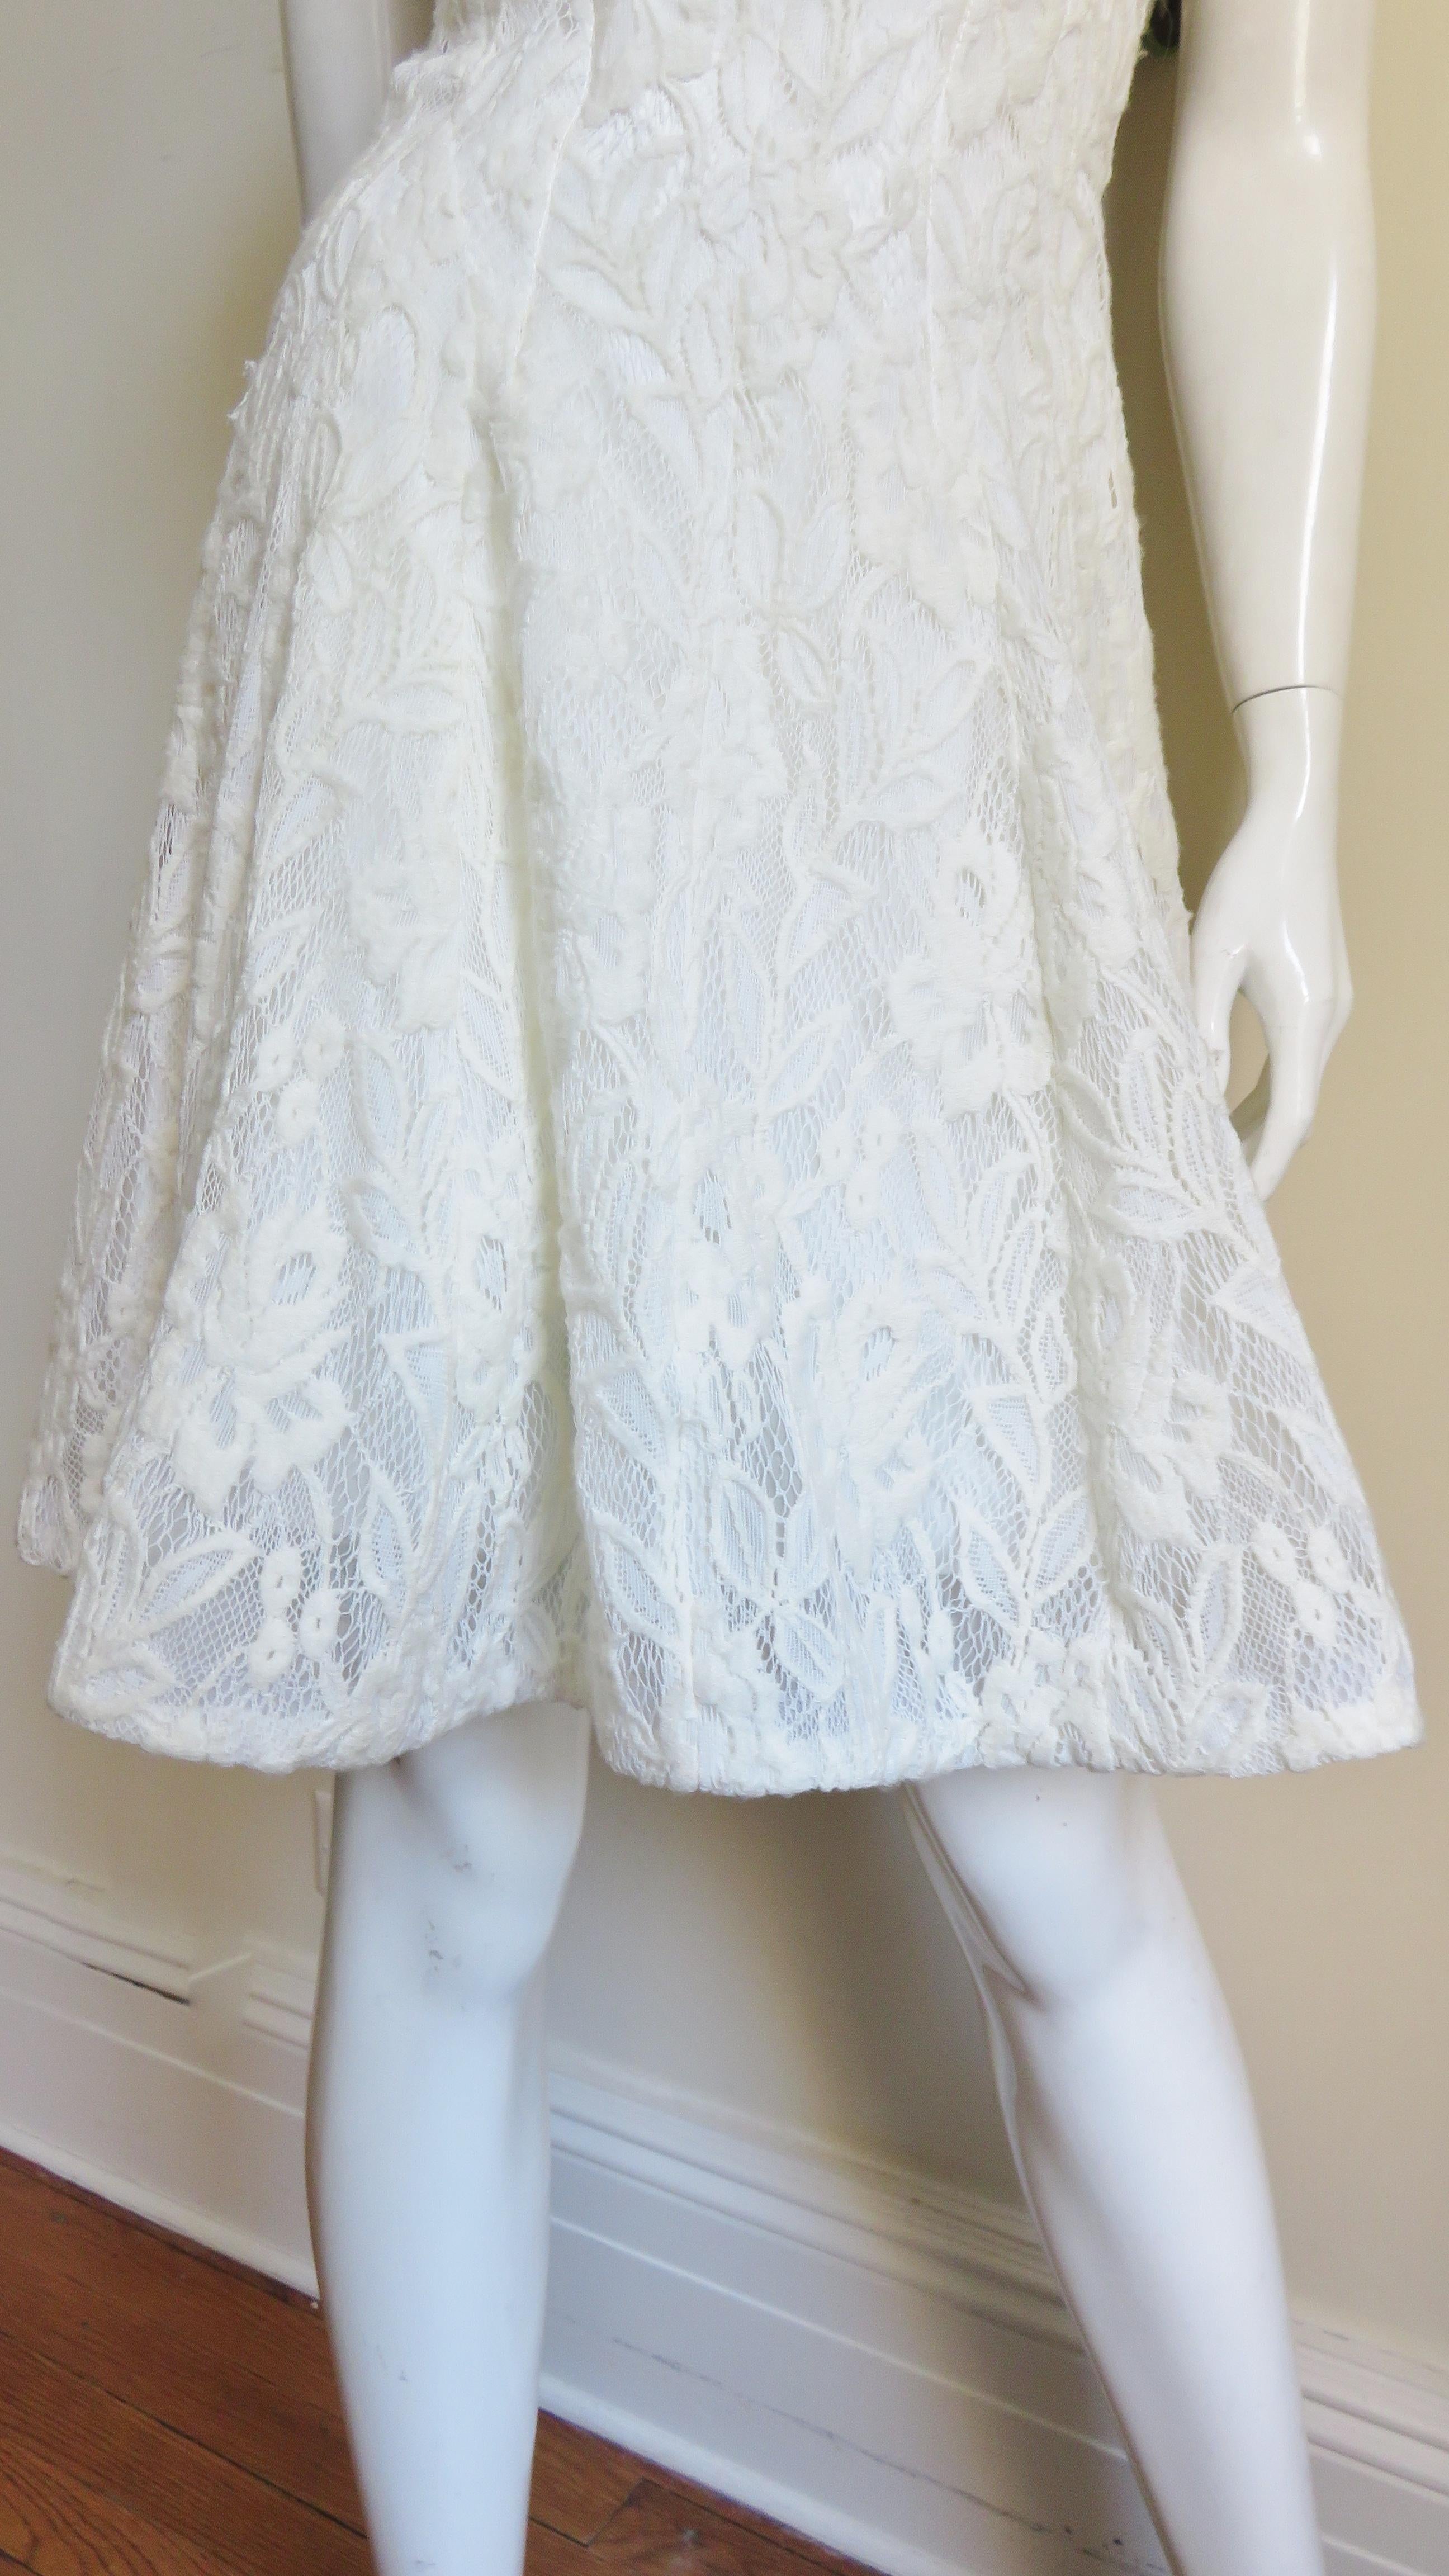 Women's Nina Ricci Lace Dress with Cut out Back For Sale